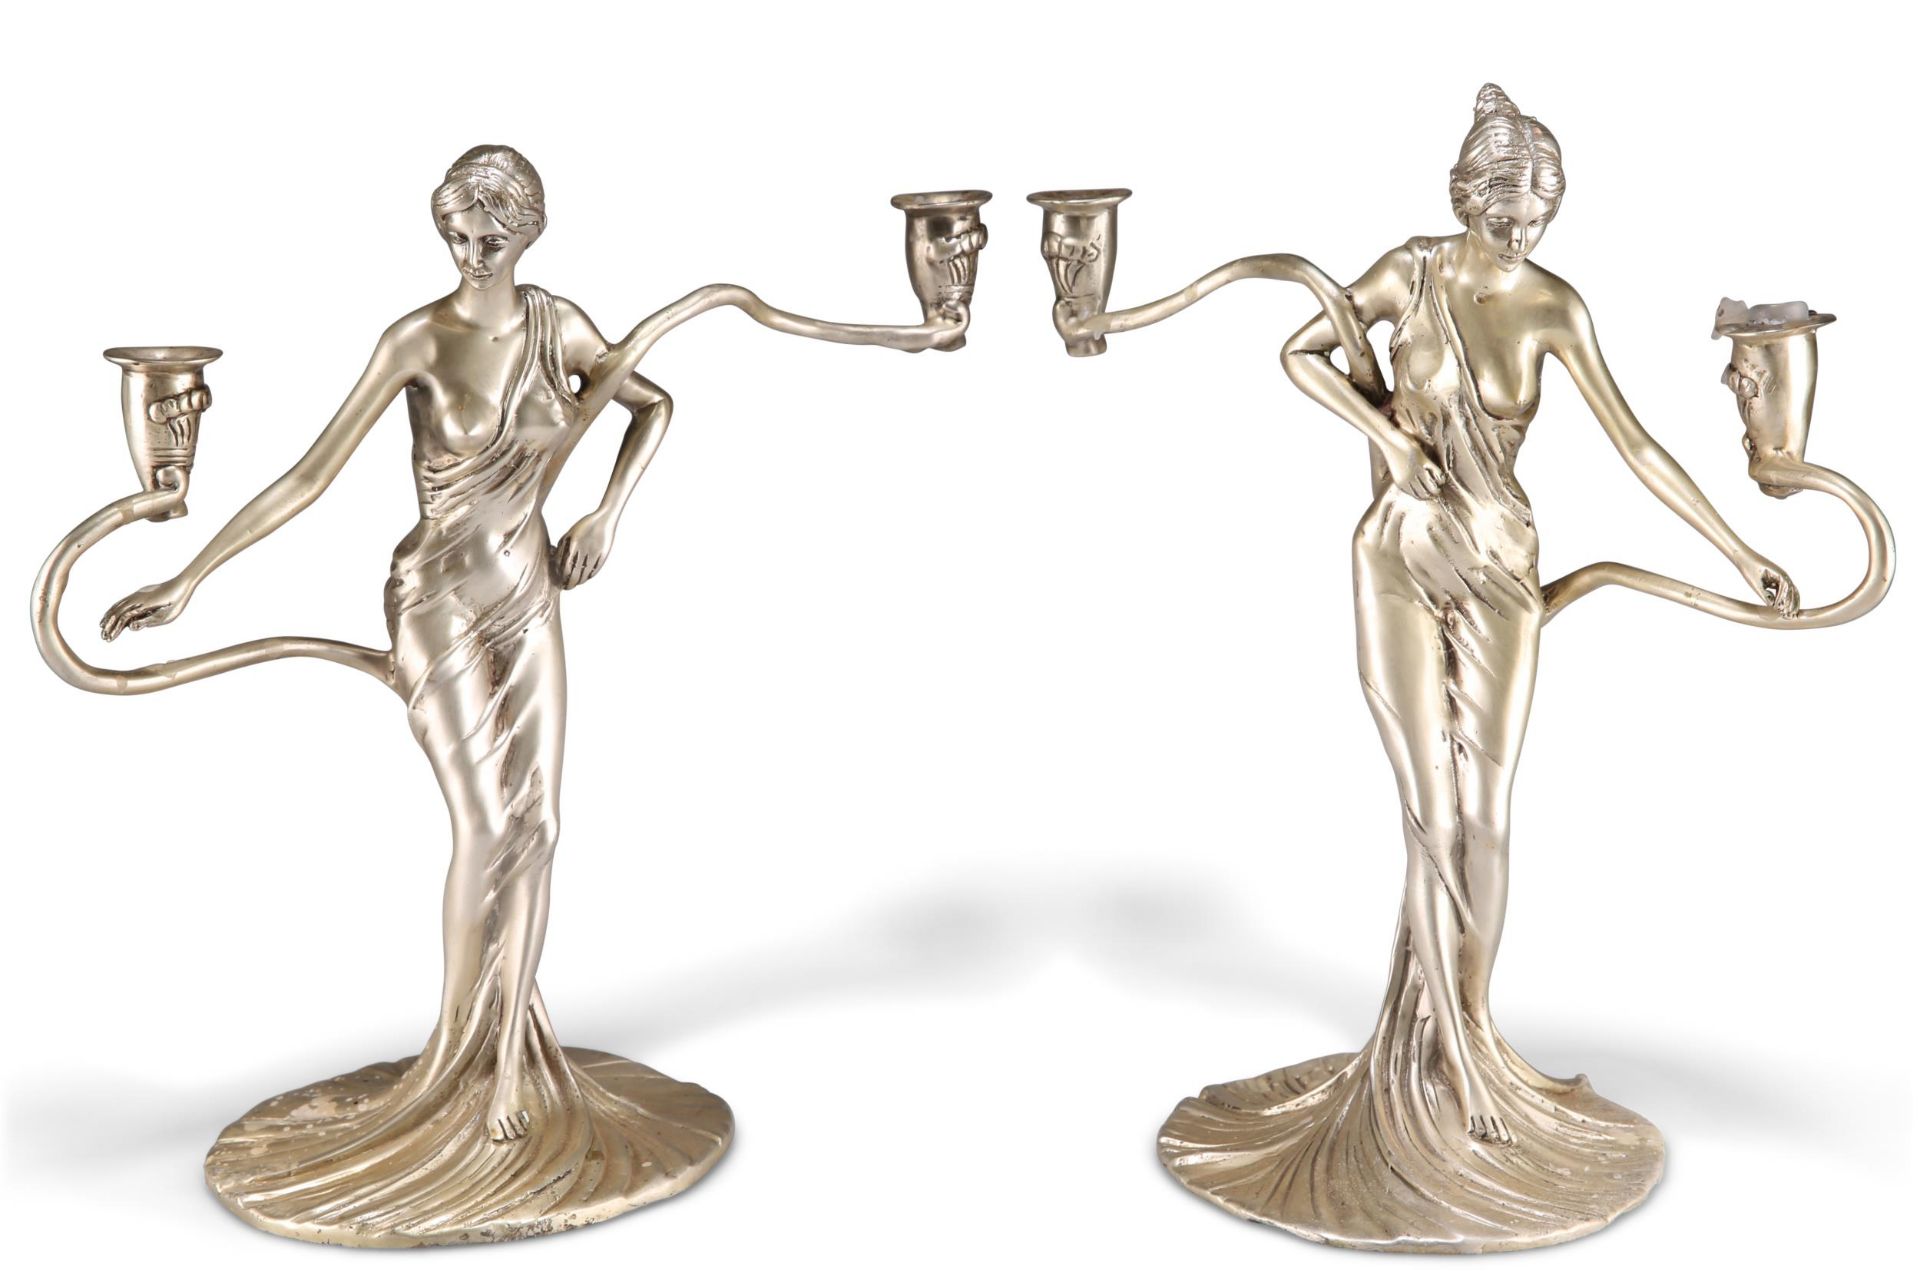 A PAIR OF ART NOUVEAU-STYLE WHITE METAL FIGURAL CANDELABRA